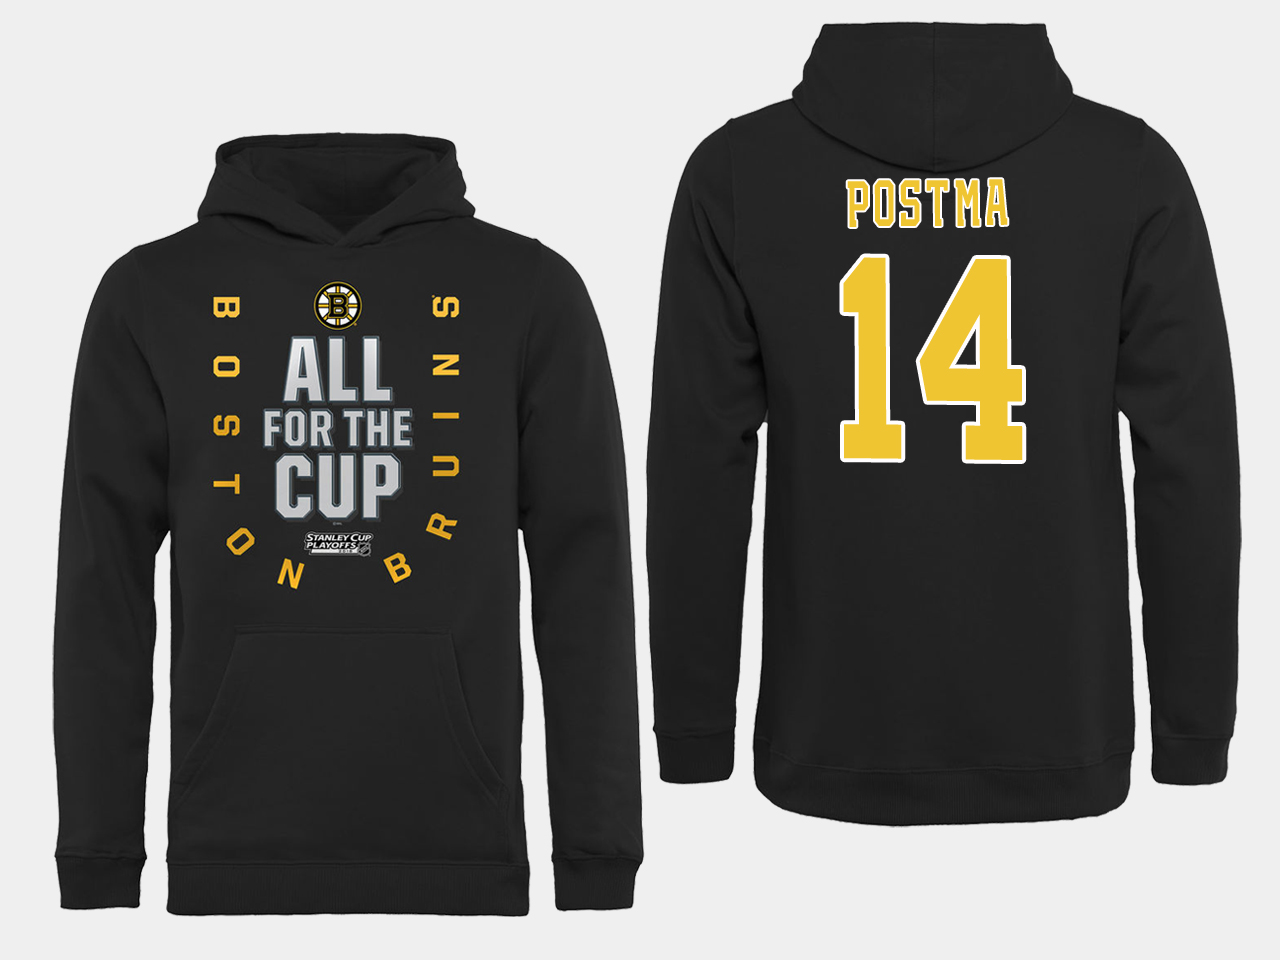 NHL Men Boston Bruins #14 Postma Black All for the Cup Hoodie->boston bruins->NHL Jersey